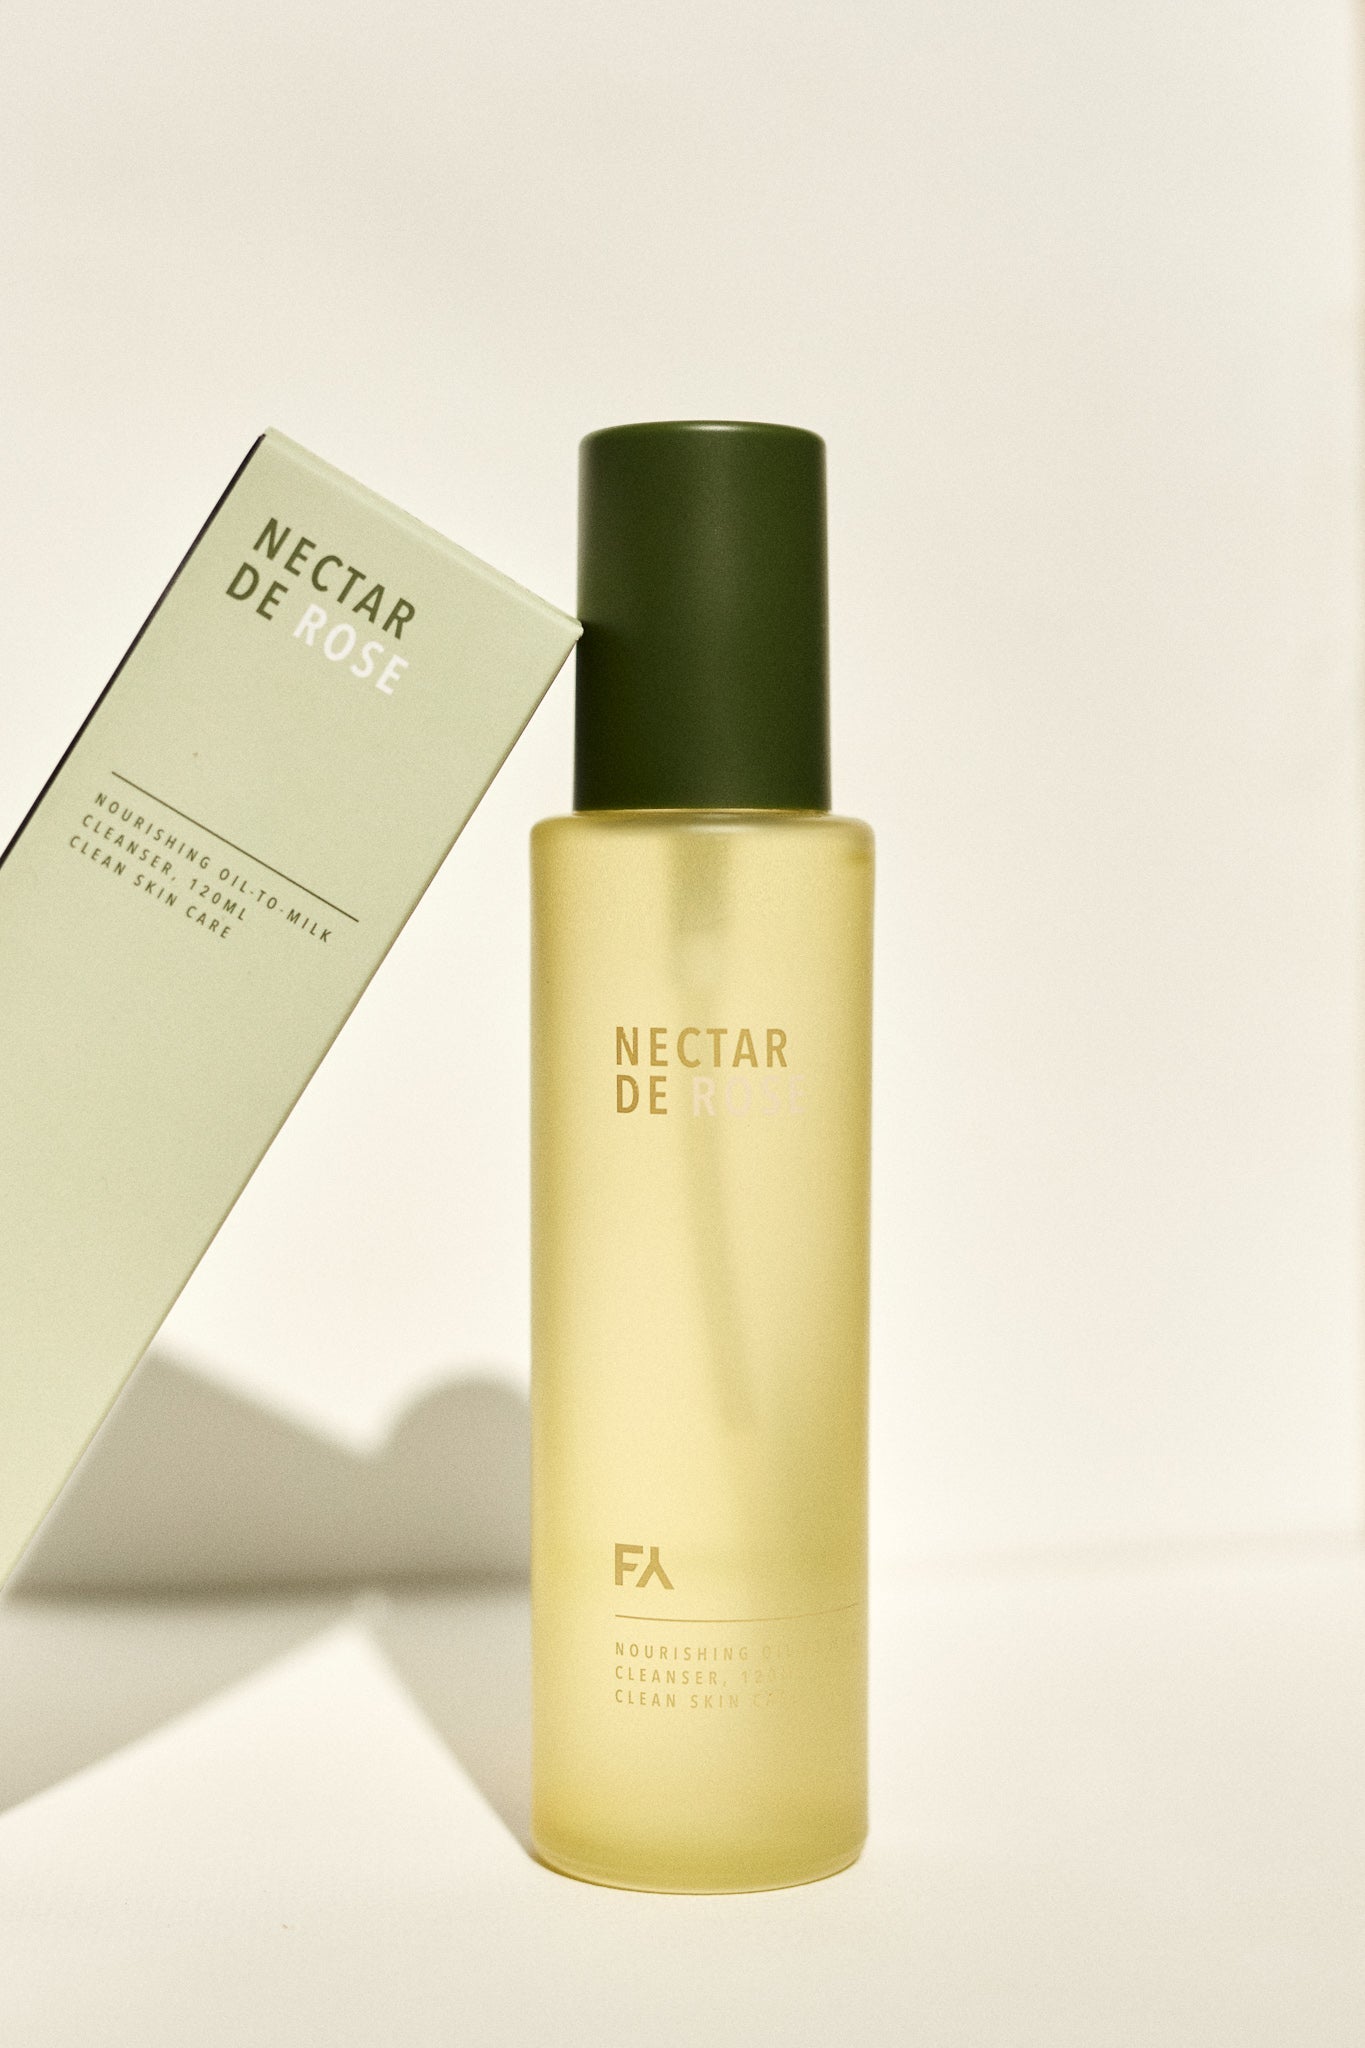 Campaign picture of the Nectar De Rose Nourishing Oil-to-Milk Cleanser next to its packaging